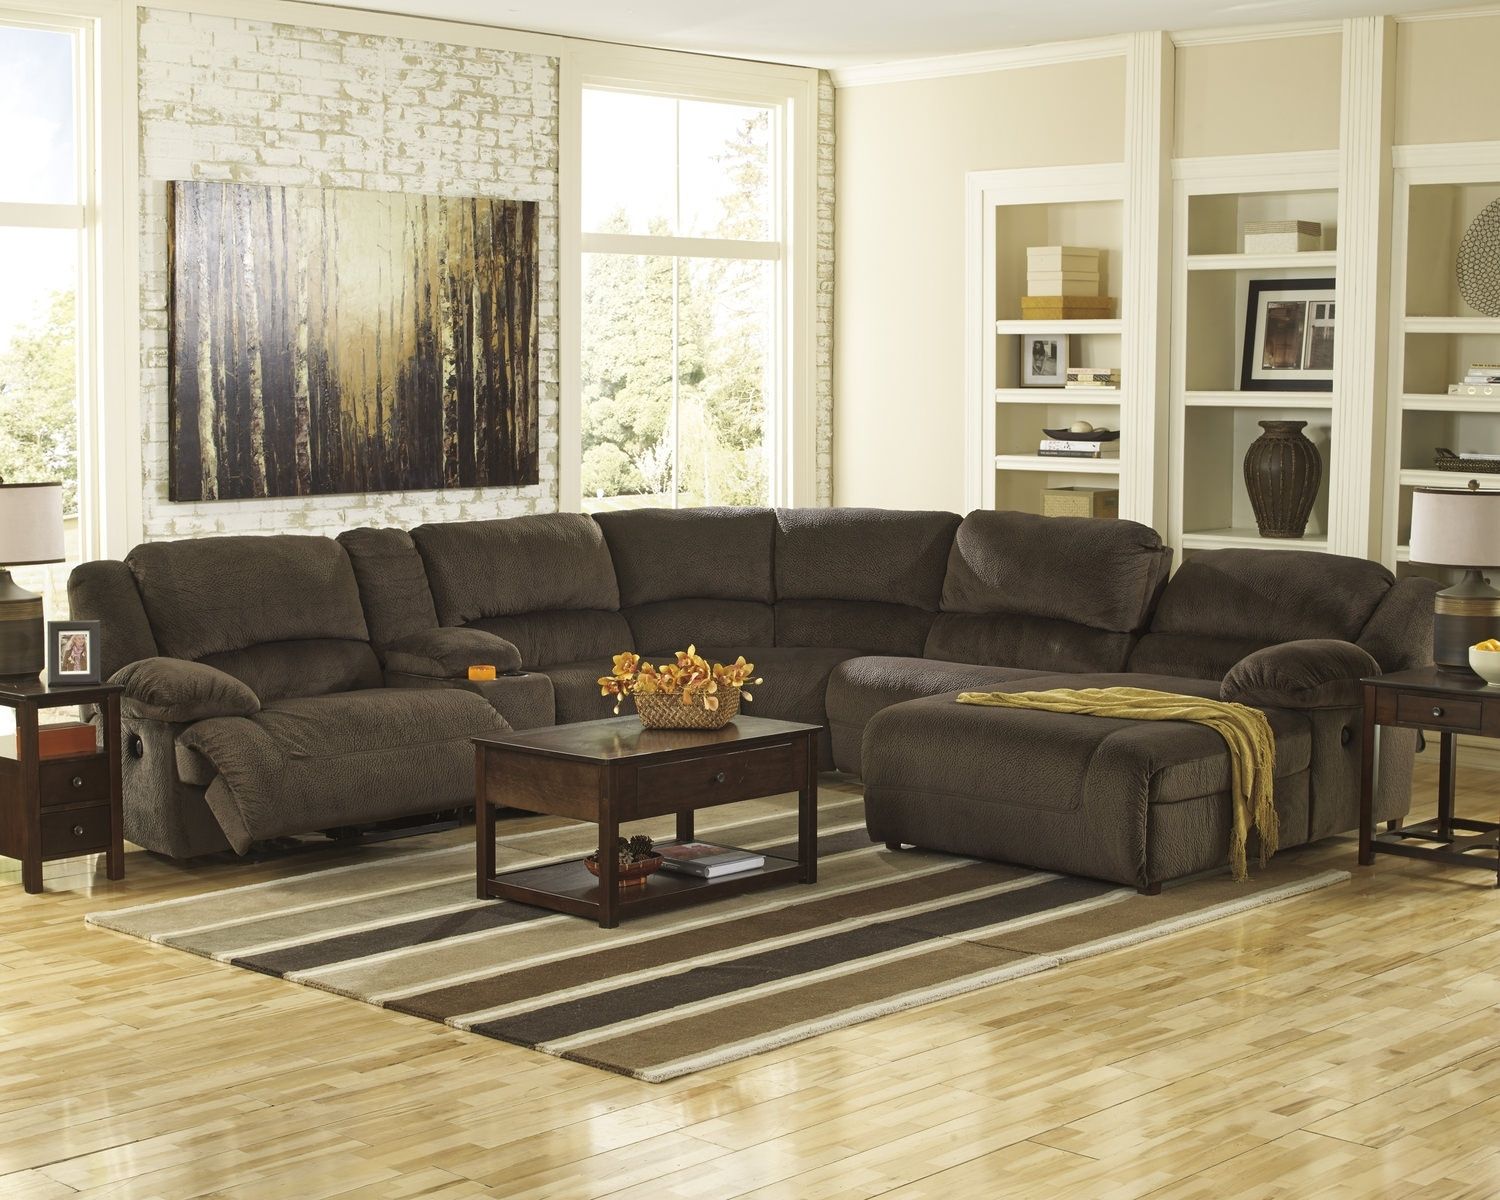 Hero 6 Piece Reclining Sectional | Dock86 In Harper Foam 3 Piece Sectionals With Raf Chaise (View 14 of 30)